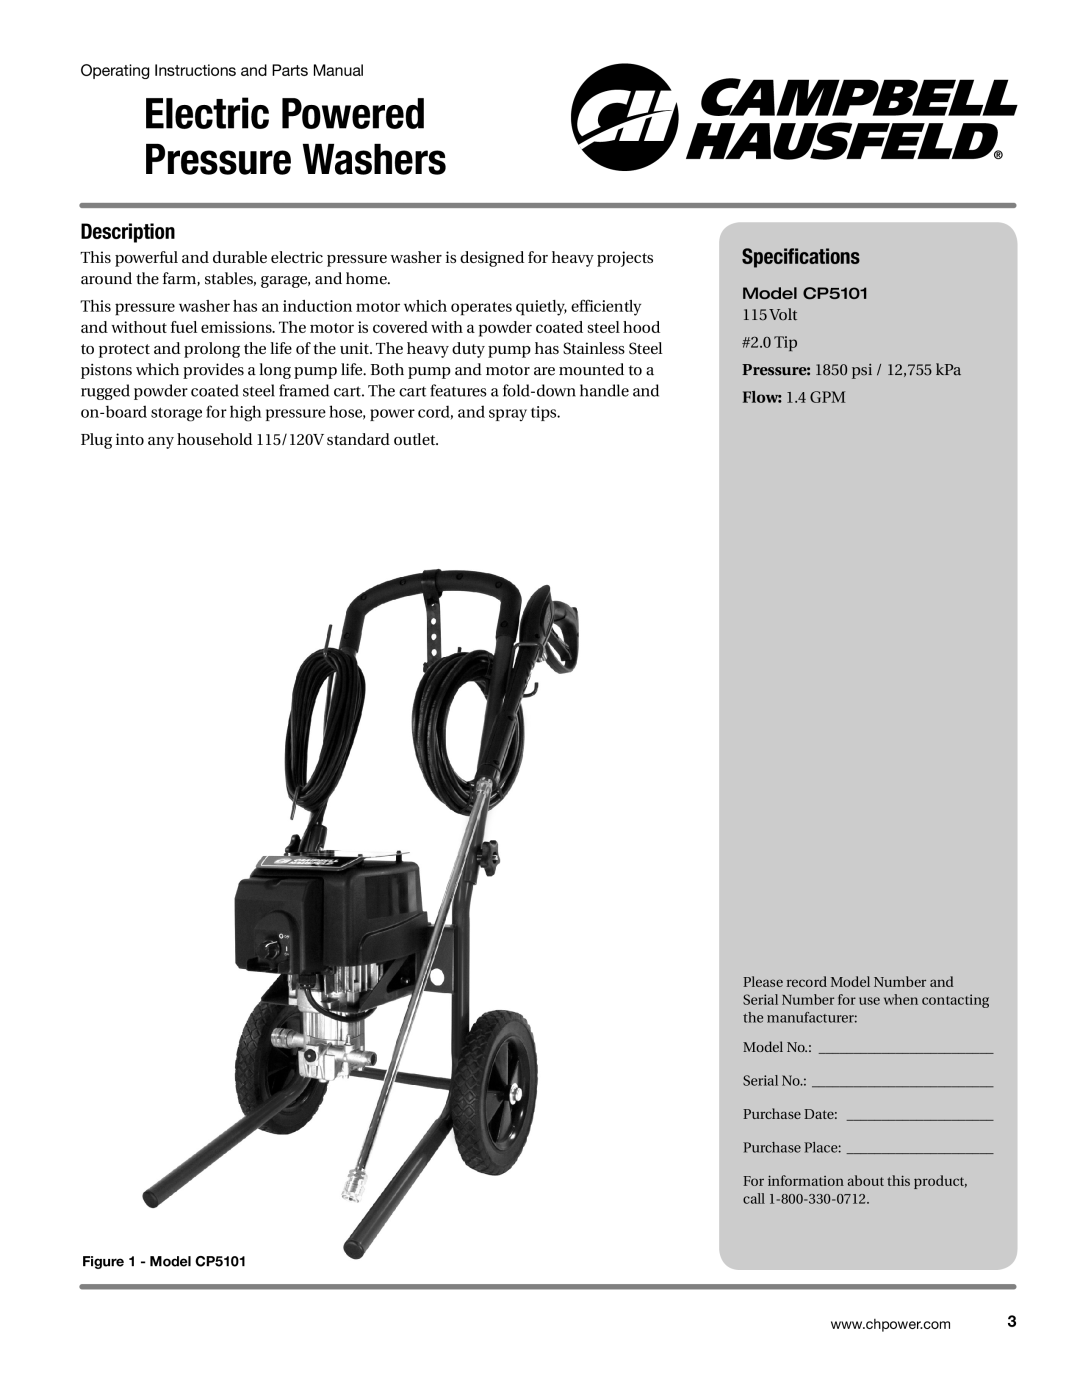 Campbell Hausfeld CP5101 manual Electric Powered Pressure Washers, Description, Specifications 